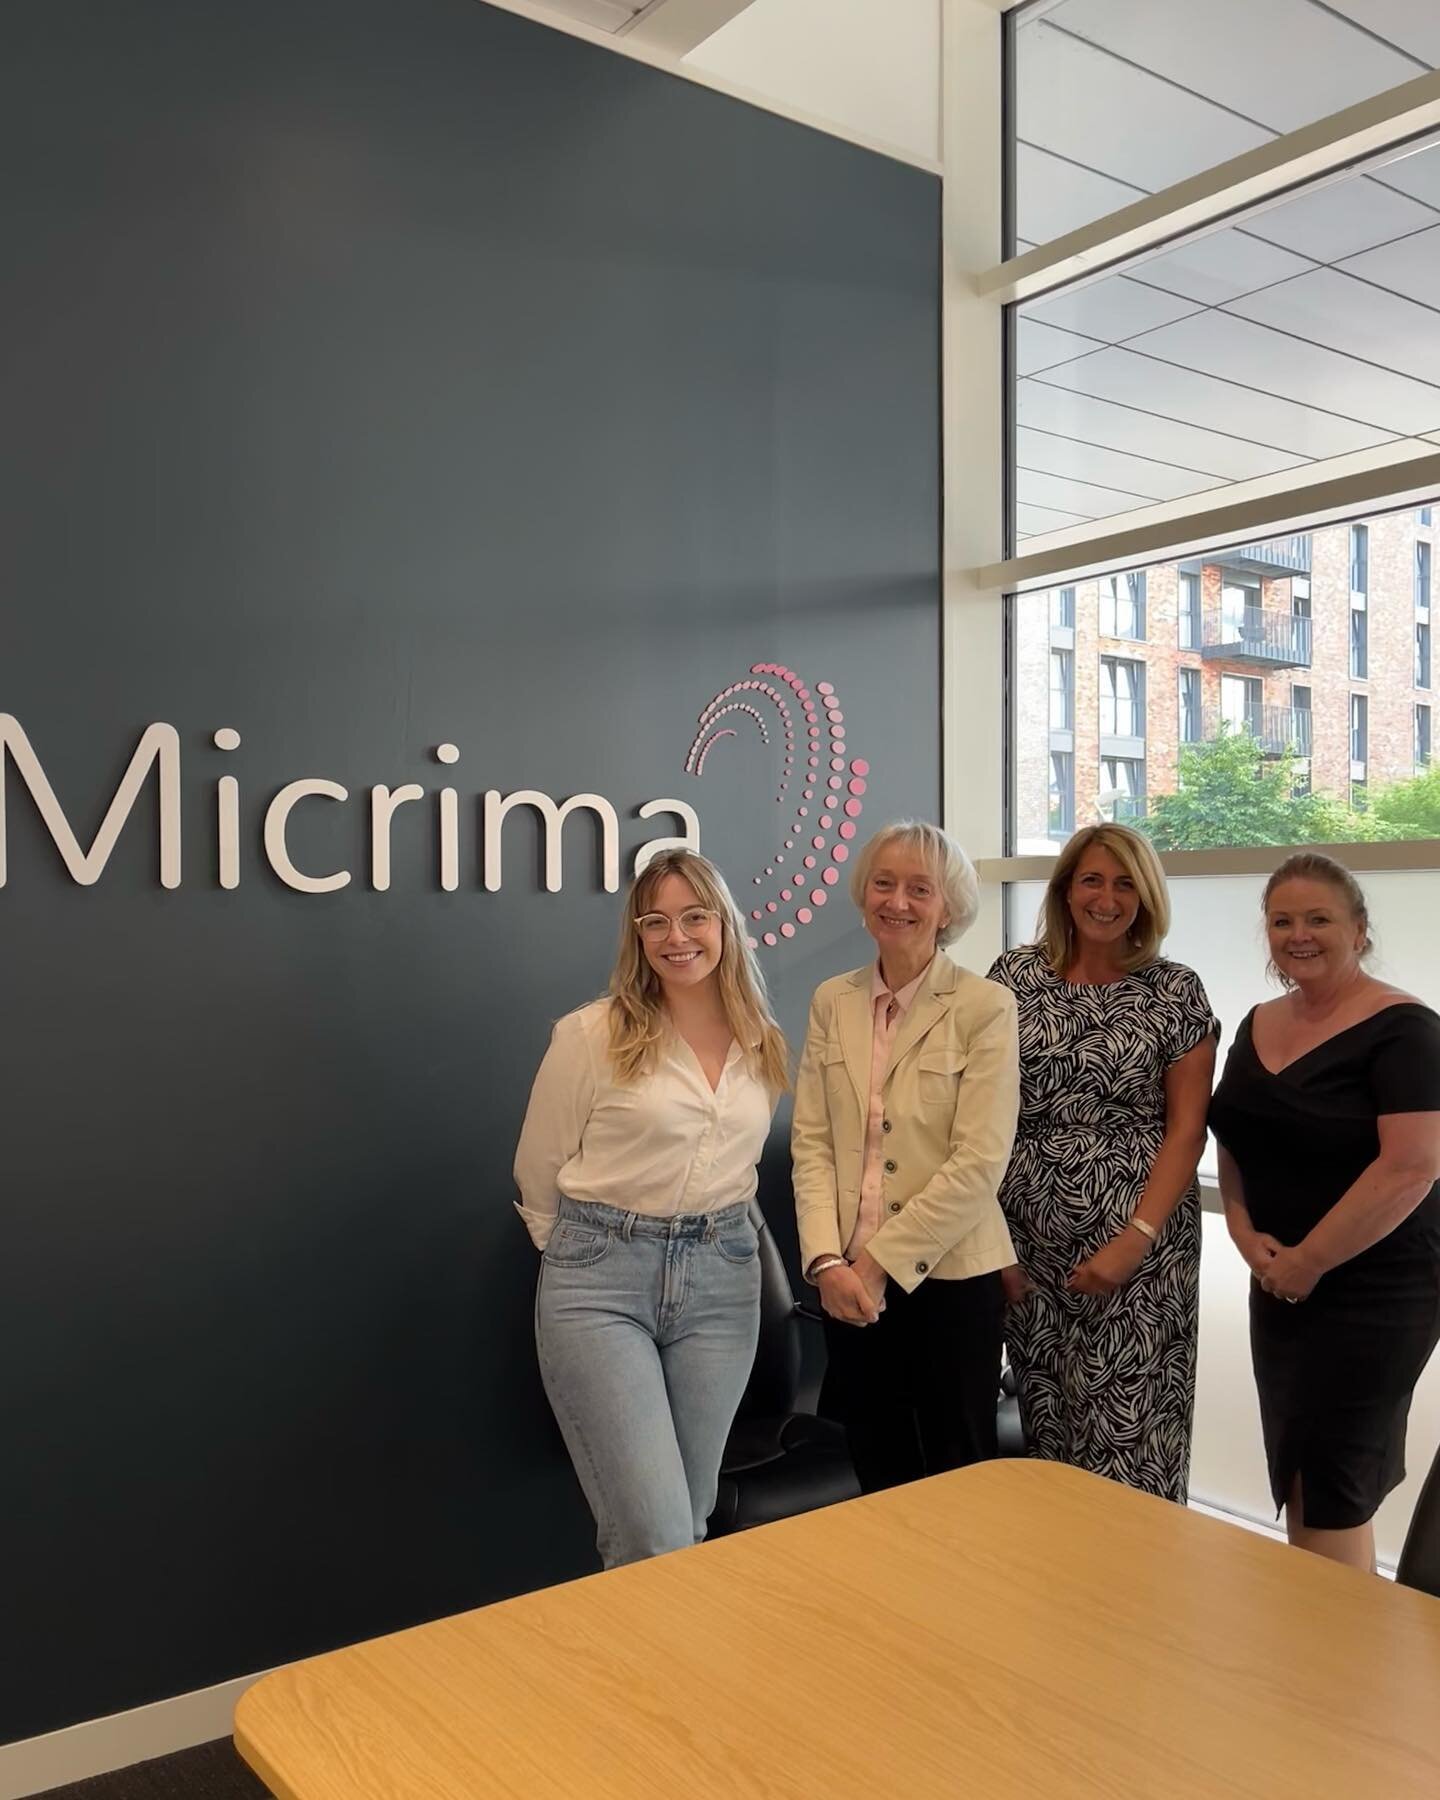 Yesterday our clinical team met in Bristol to establish and discuss future strategies - it was a great day, with lots of knowledge and ideas for the upcoming months shared!

#breastcancer #breastcancerawareness #earlydetection #finditearly #breastcan